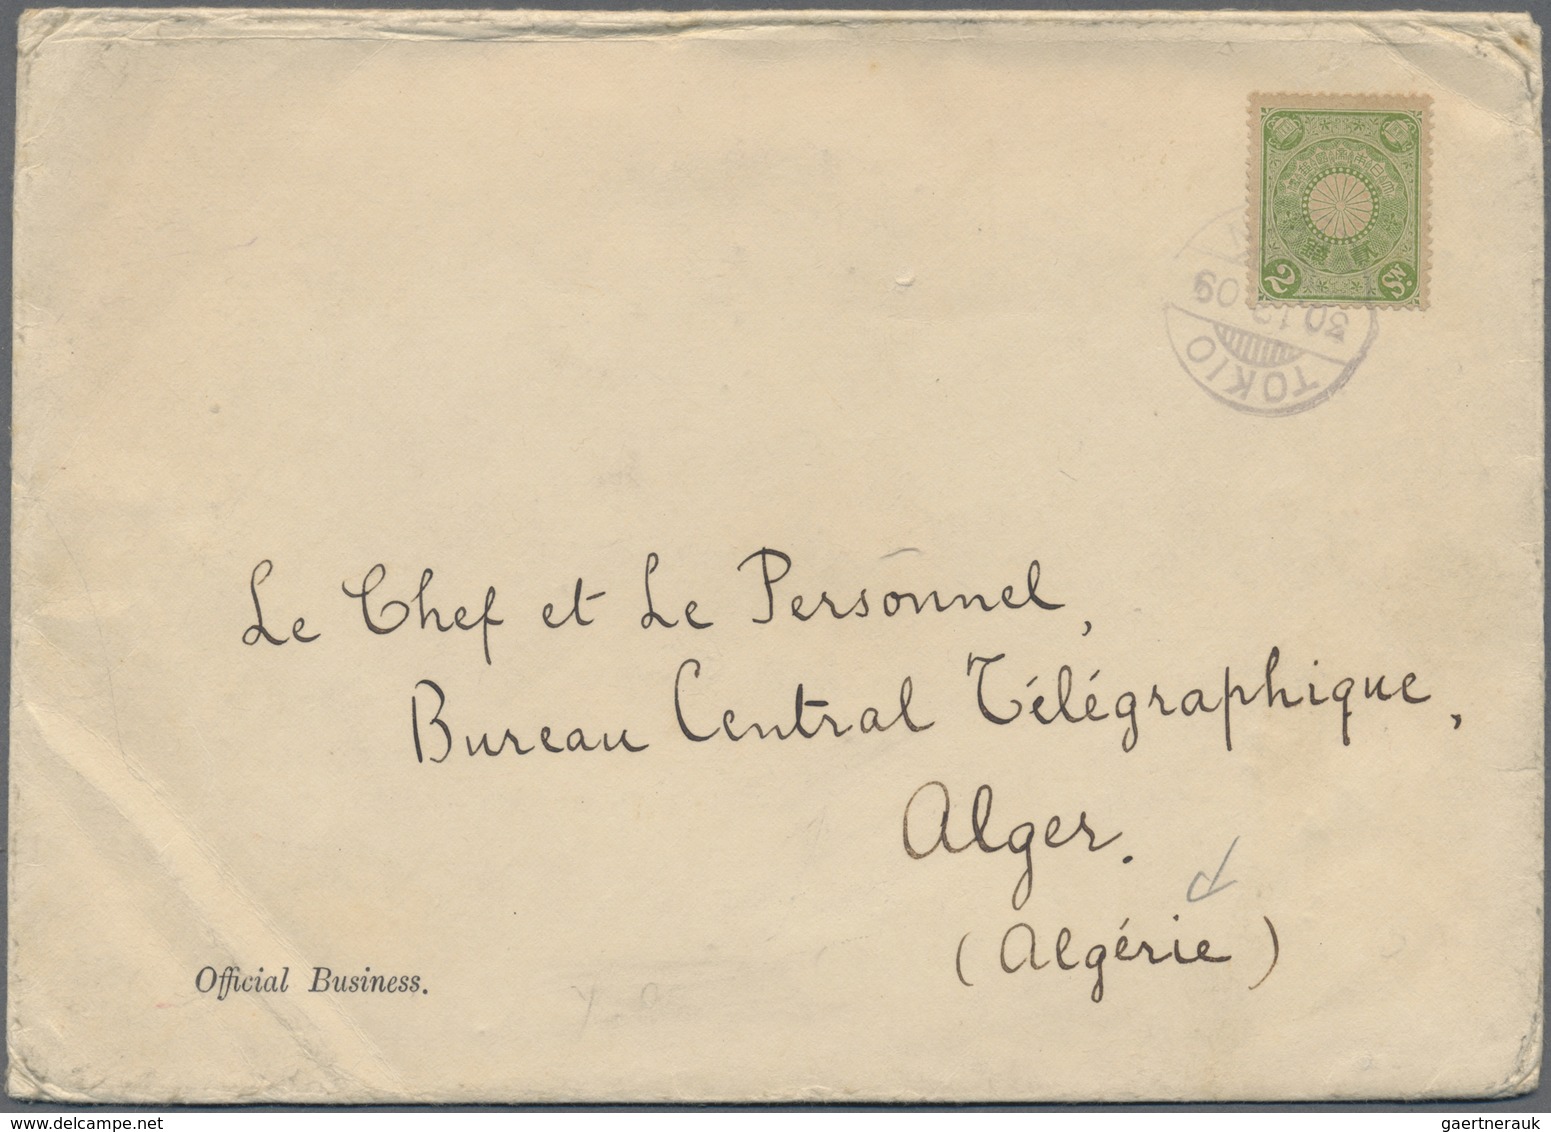 /Br Japan: 1904/40, ppc (4) and printed matter envelope (1, by Tokyo post office) all used foreign inc.